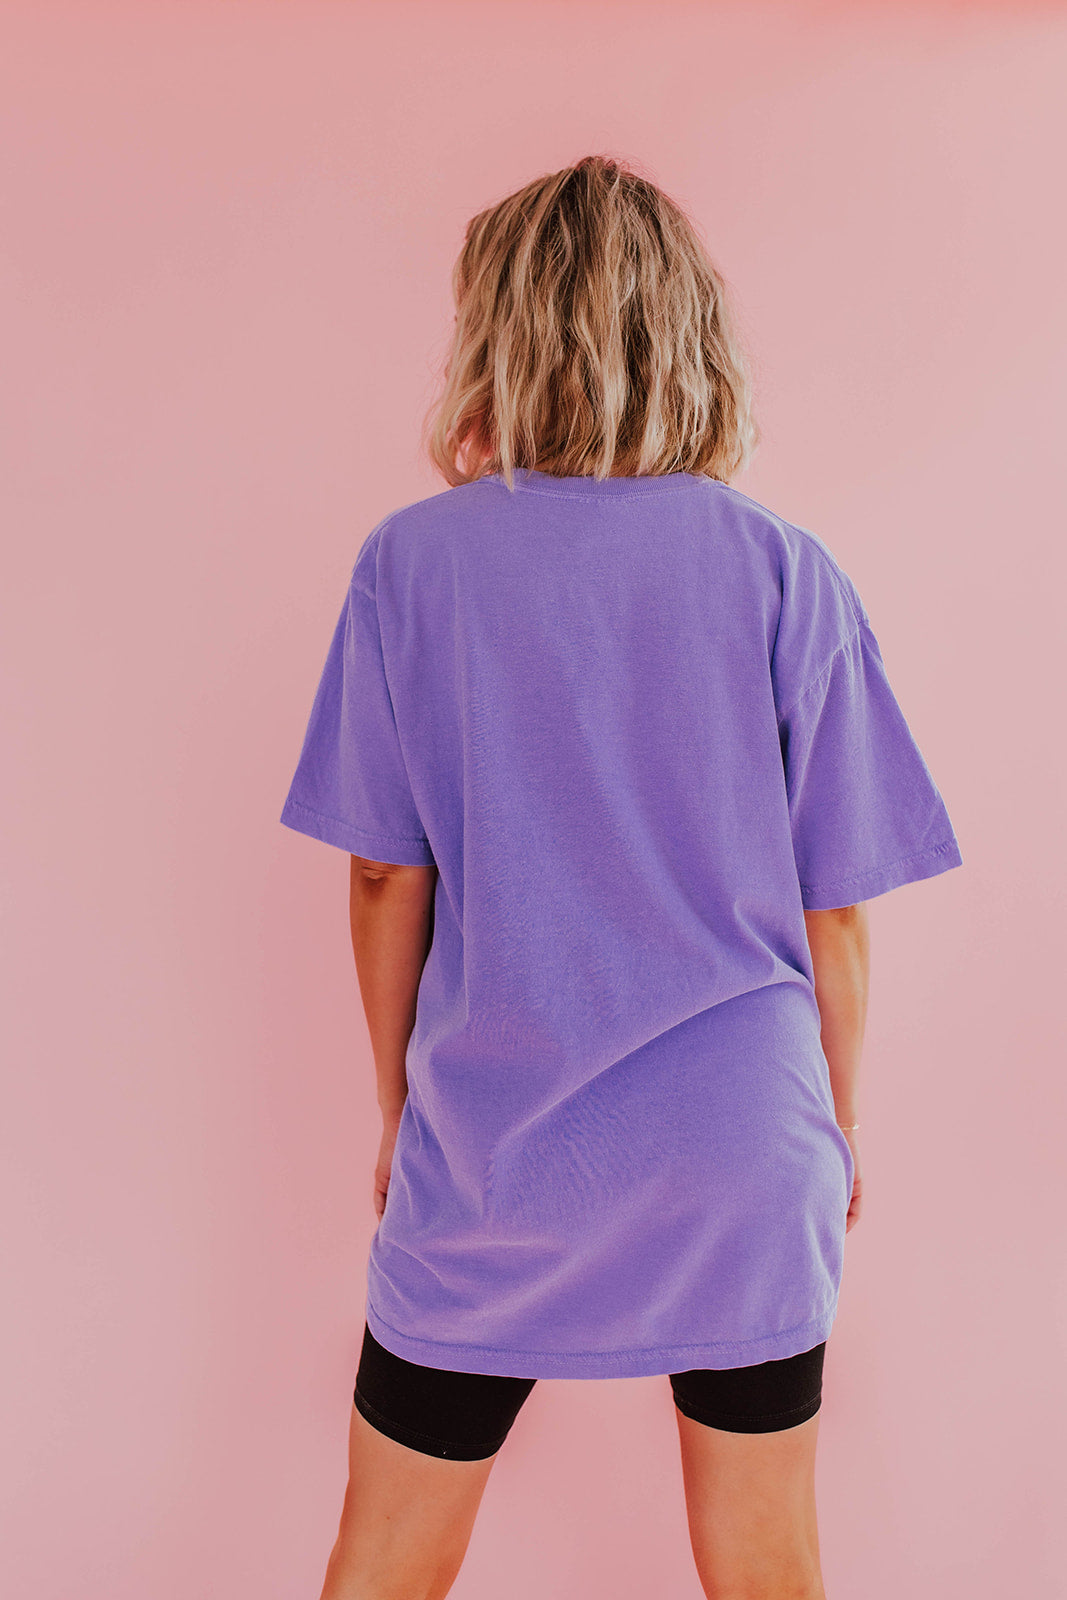 THE MASTERMIND HOLOGRAPHIC TEE IN VIOLET BY PINK DESERT